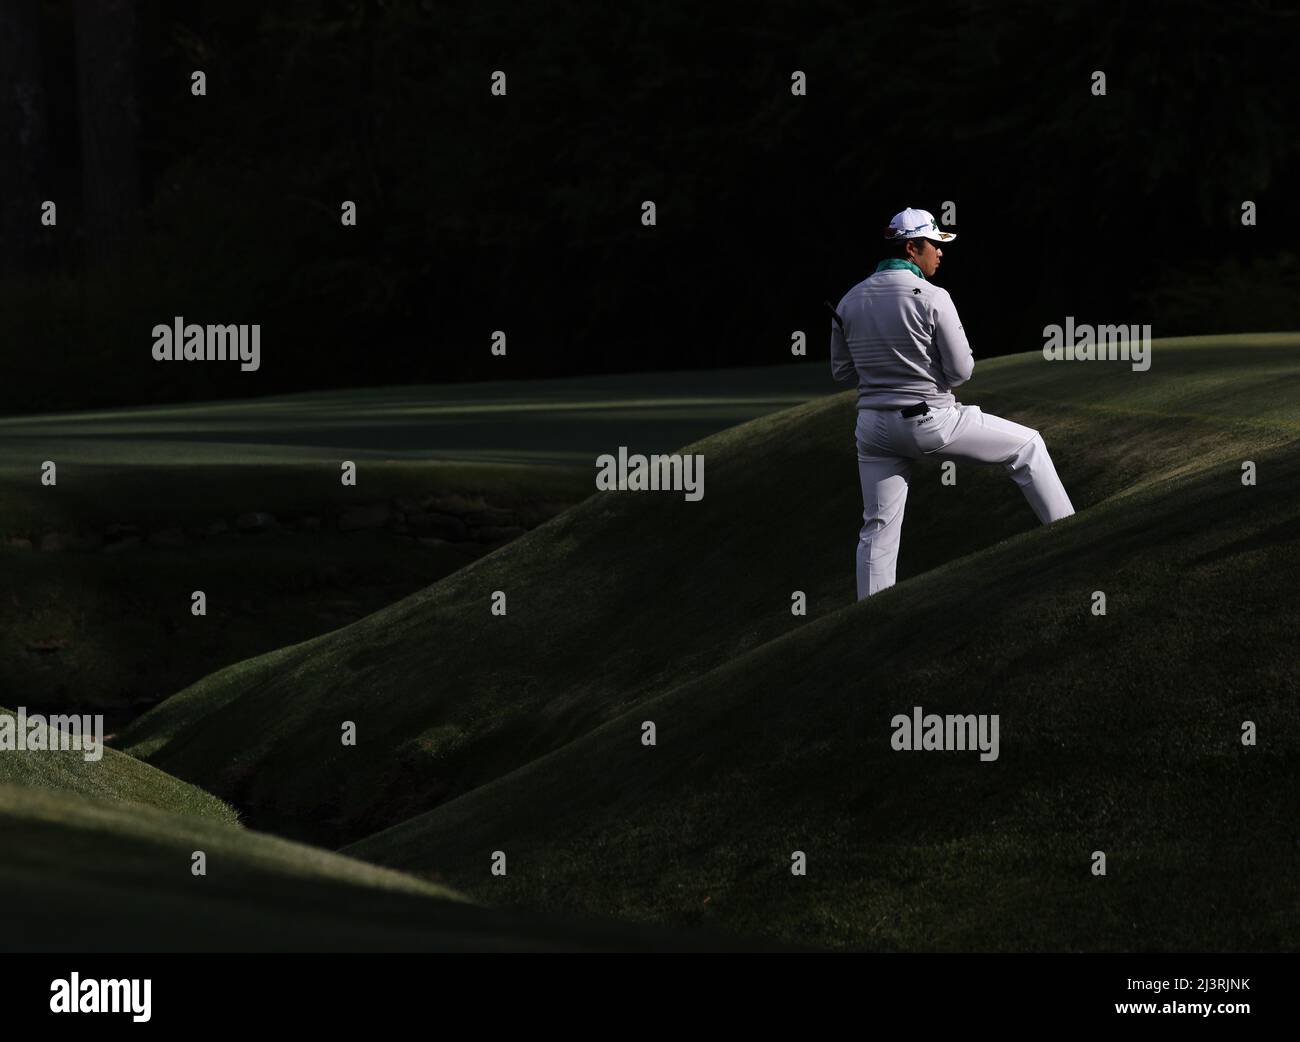 Augusta, United States. 09th Apr, 2022. Hideki Matsuyama of Japan stands on the 13th green near Raes Creek in the third round of The Masters golf tournament at Augusta National Golf Club in Augusta, Georgia on Saturday, April 9, 2022. Photo by John Angelillo/UPI Credit: UPI/Alamy Live News Stock Photo